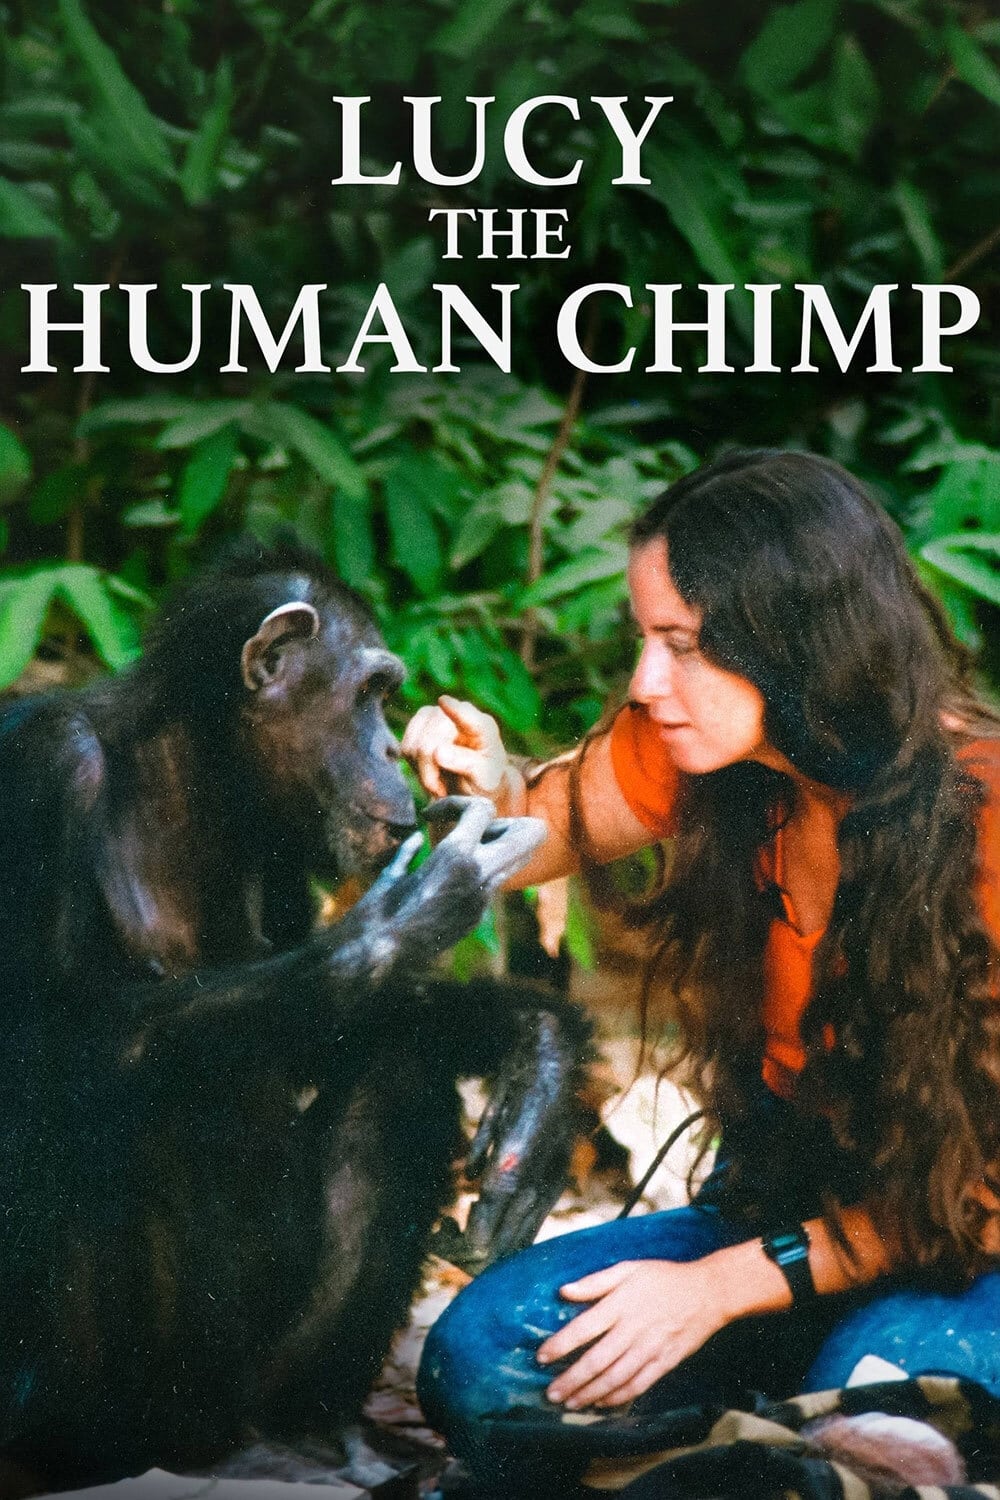 Lucy the Human Chimp